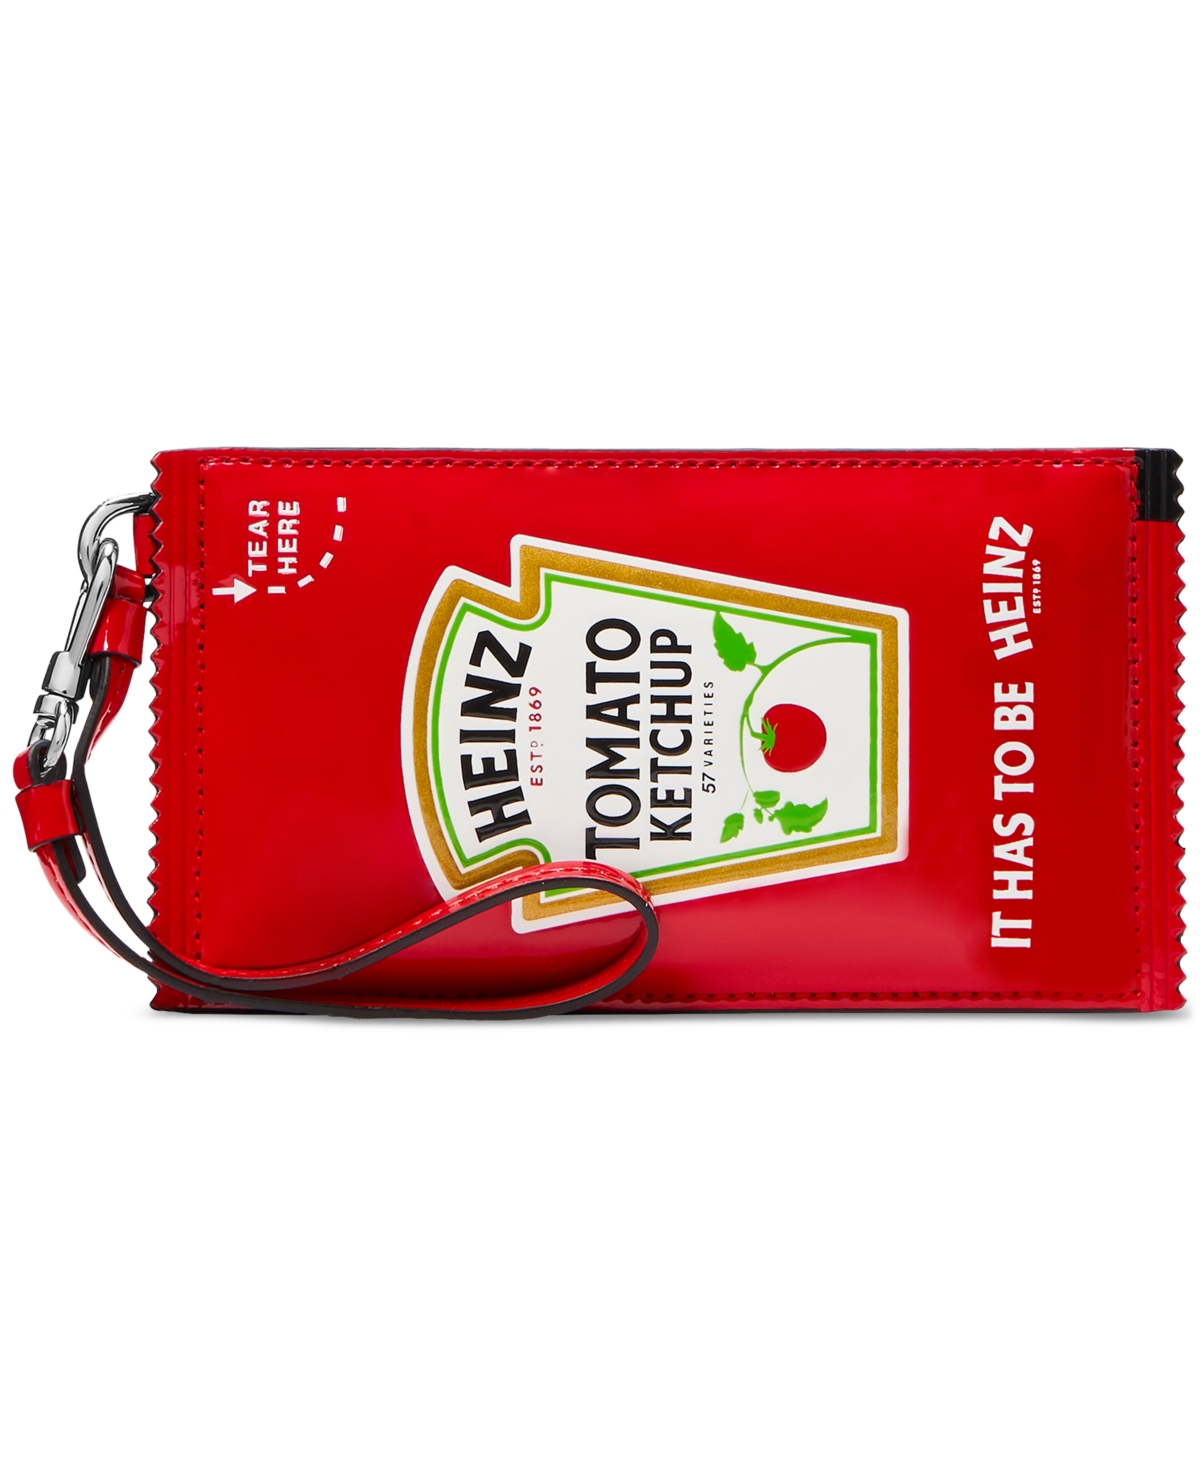 Heinz Printed Patent Coin Card Case Wristlet - Catsup Red